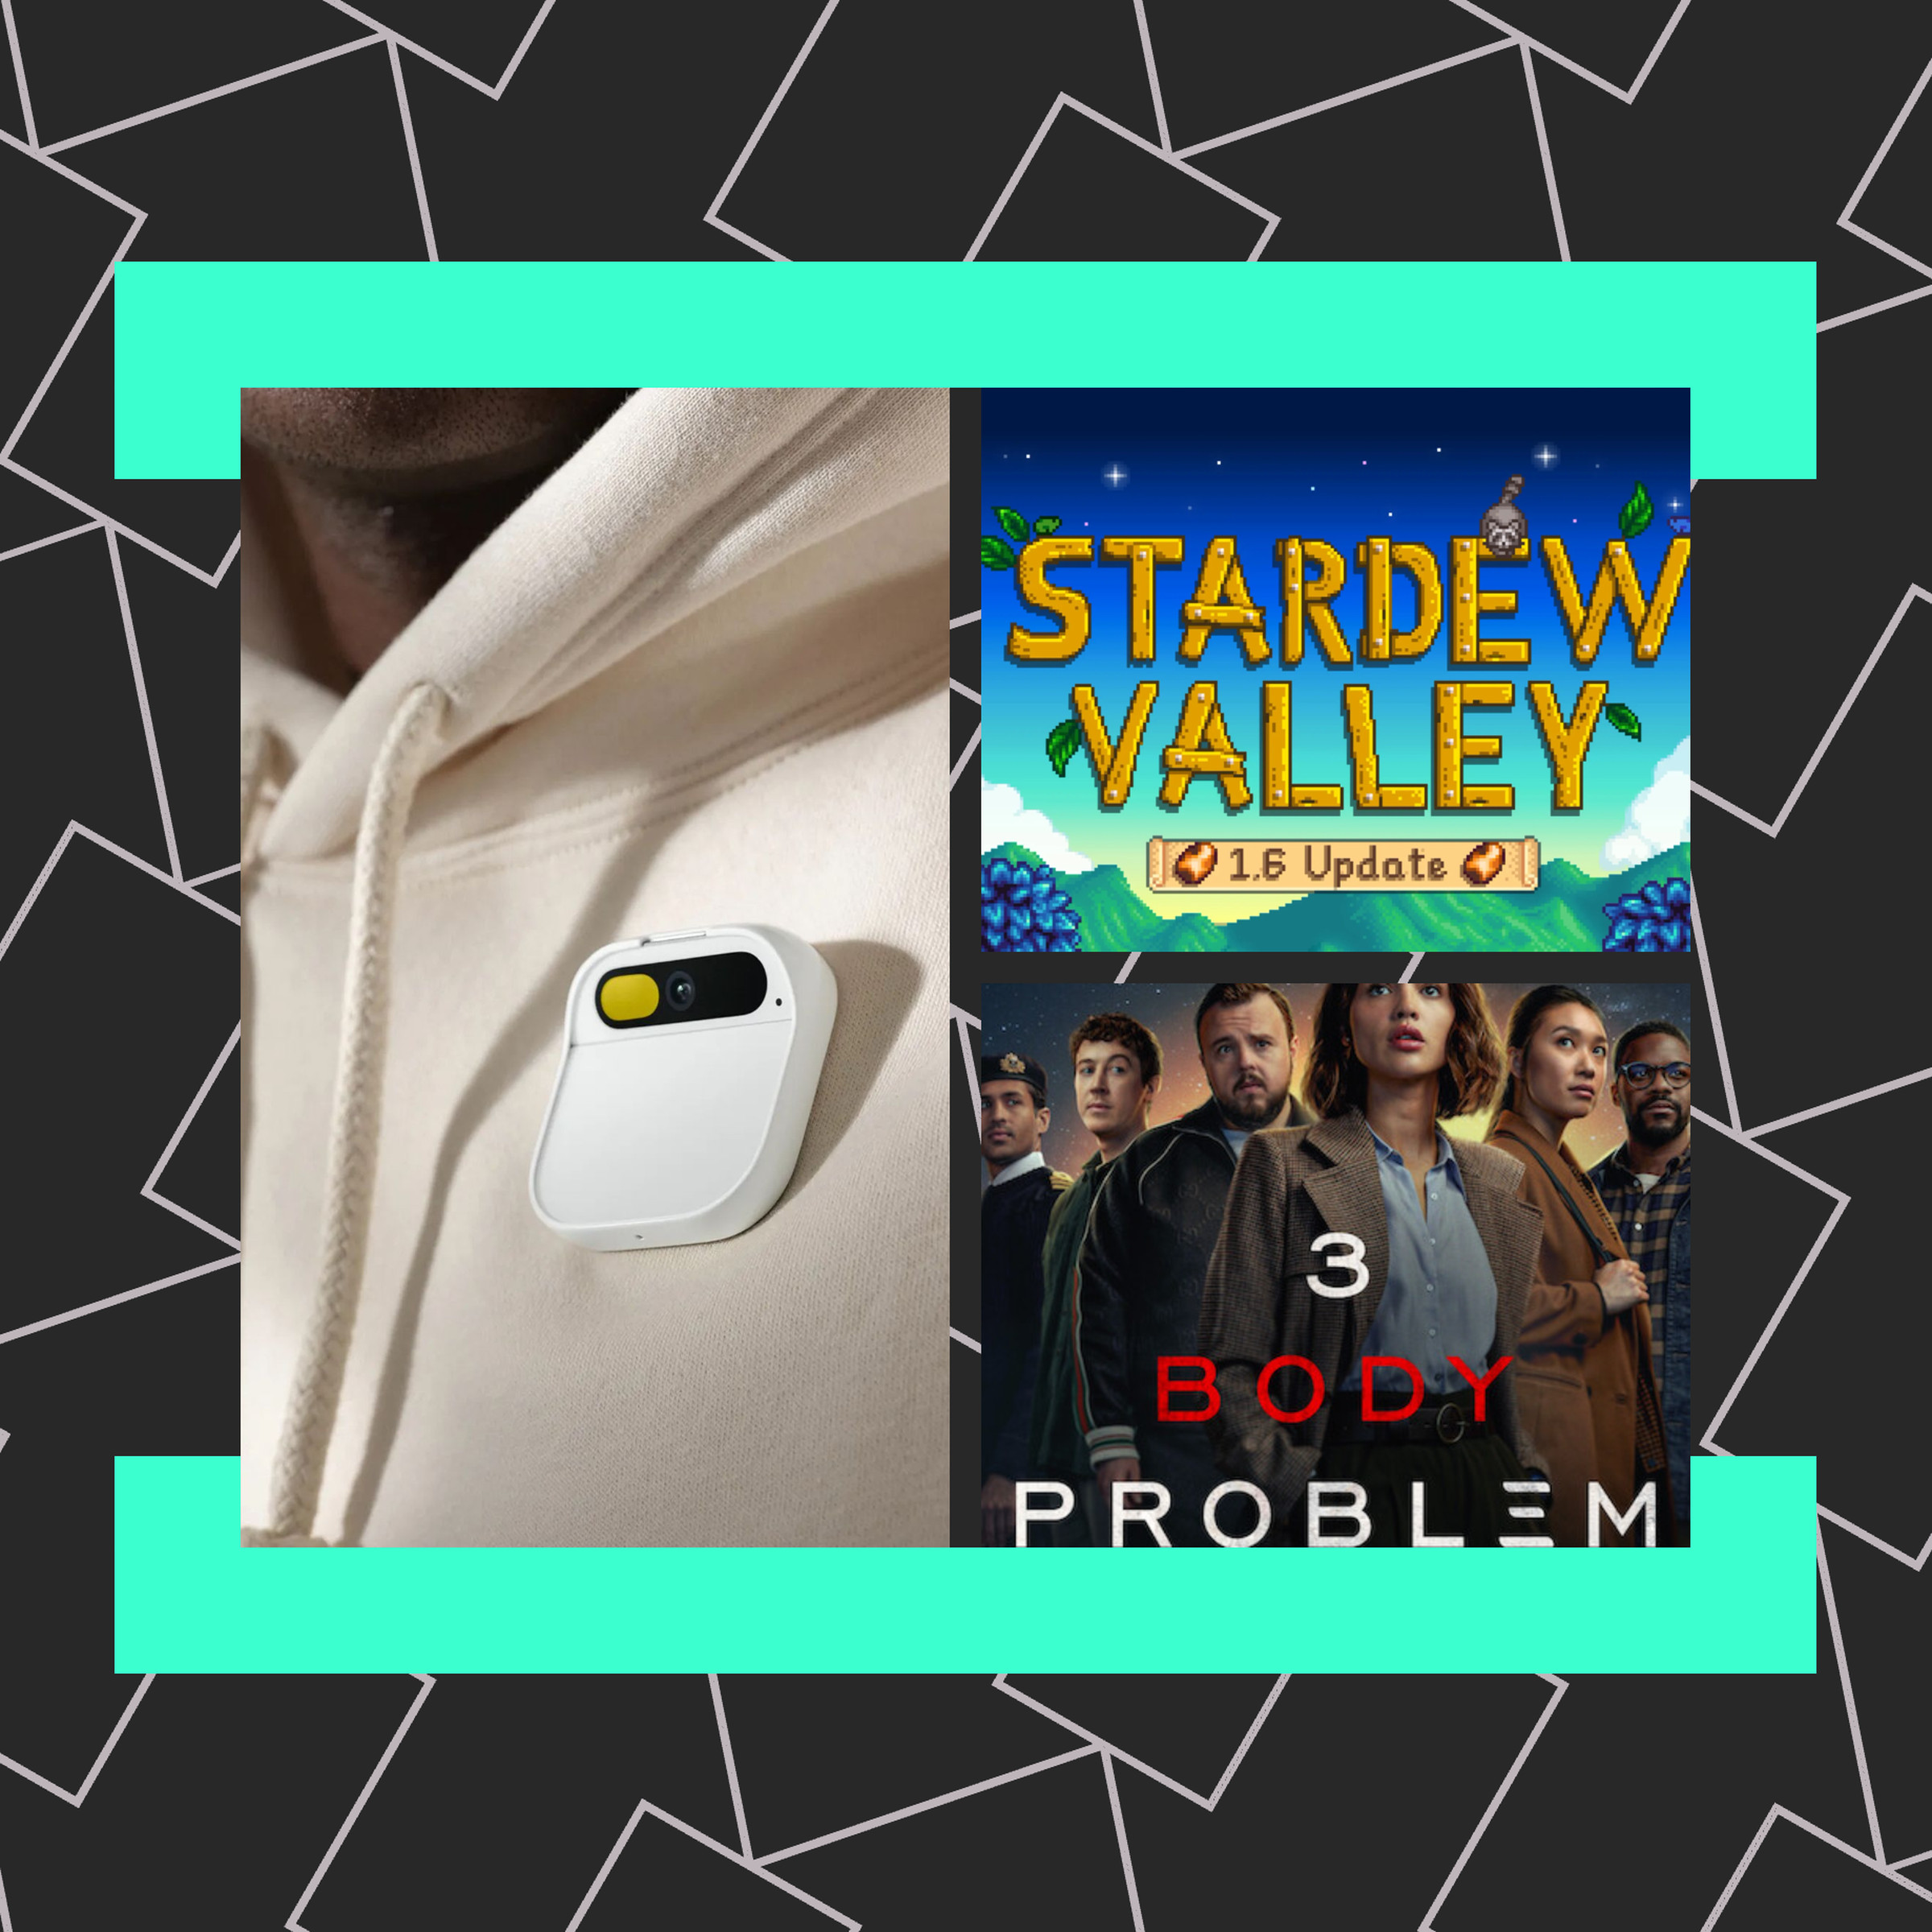 An illustration of the Humane AI Pin, Stardew Valley, and the 3 Body Problem.